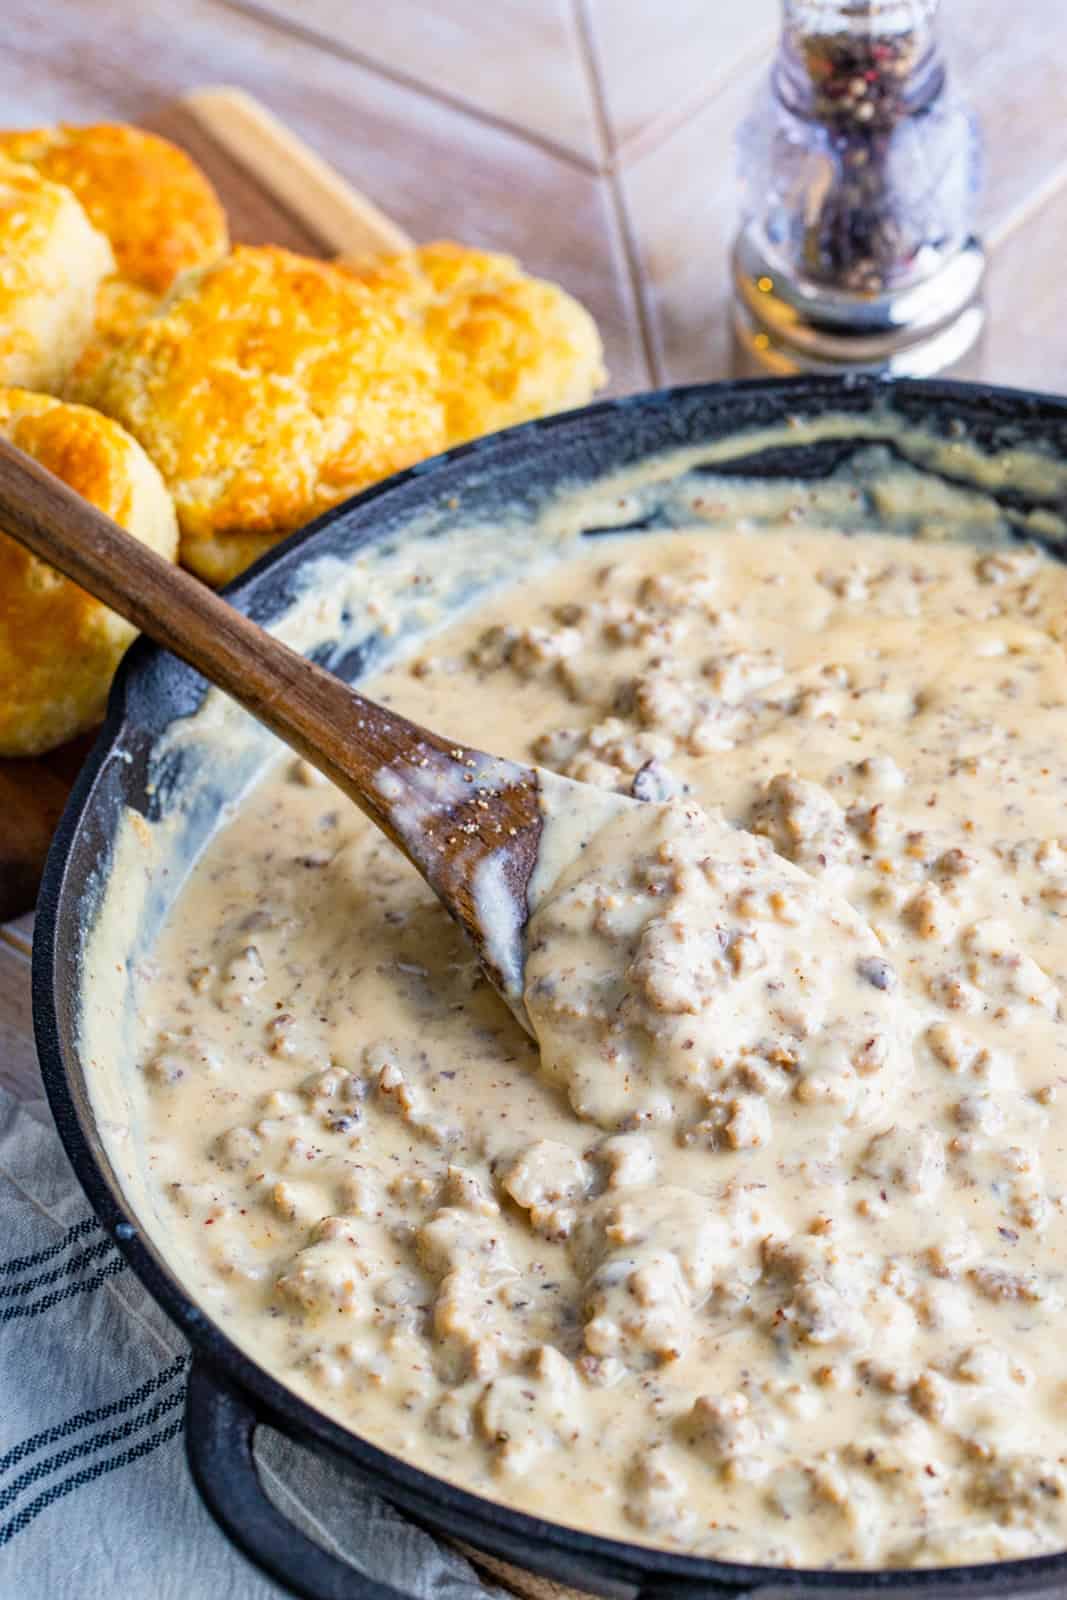 Spoon in pan with Sausage Gravy